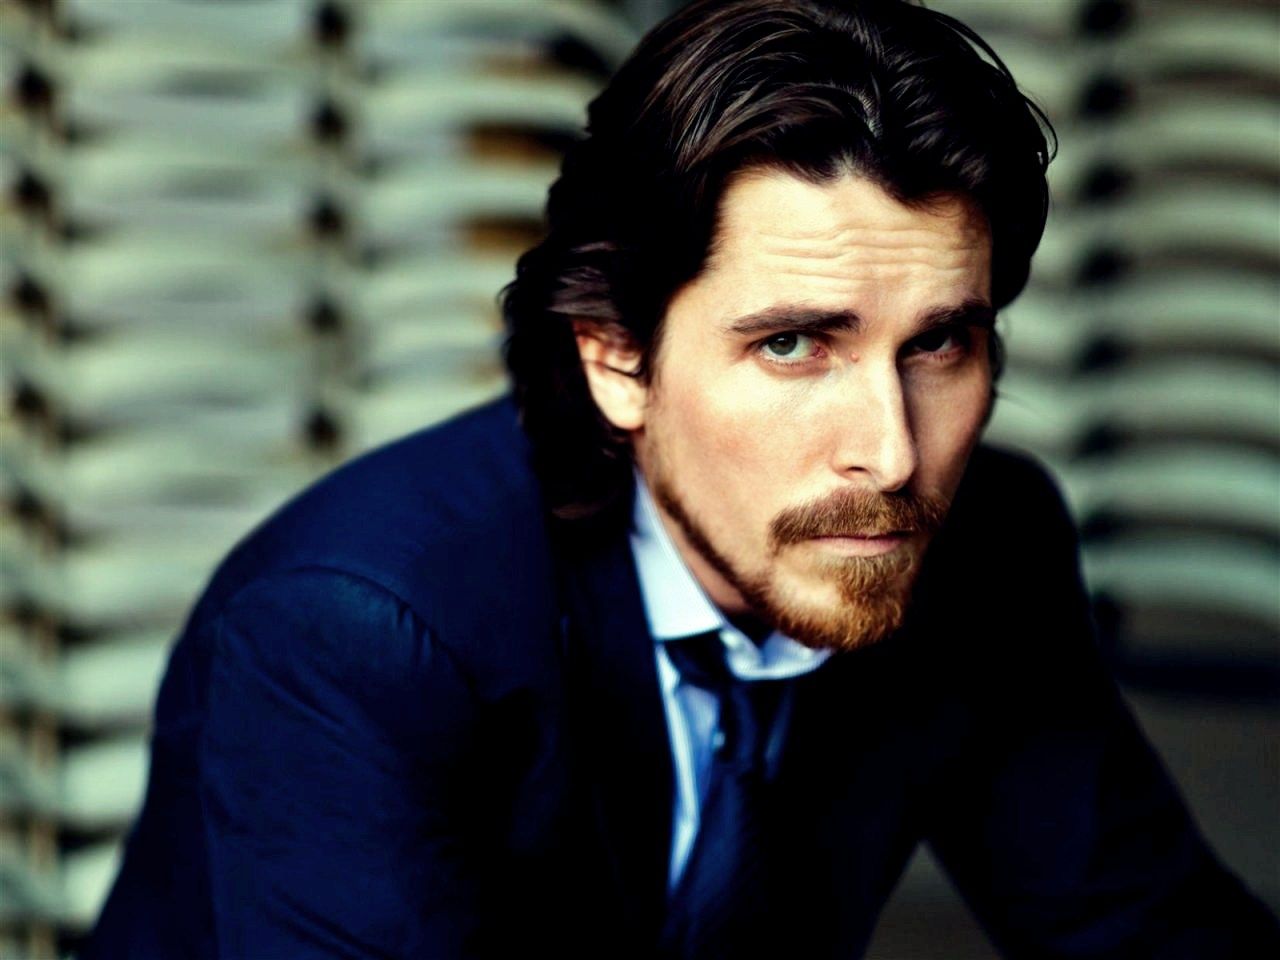 50 million dollars to Christian Bale to reprise his role as Batman in Justice League?